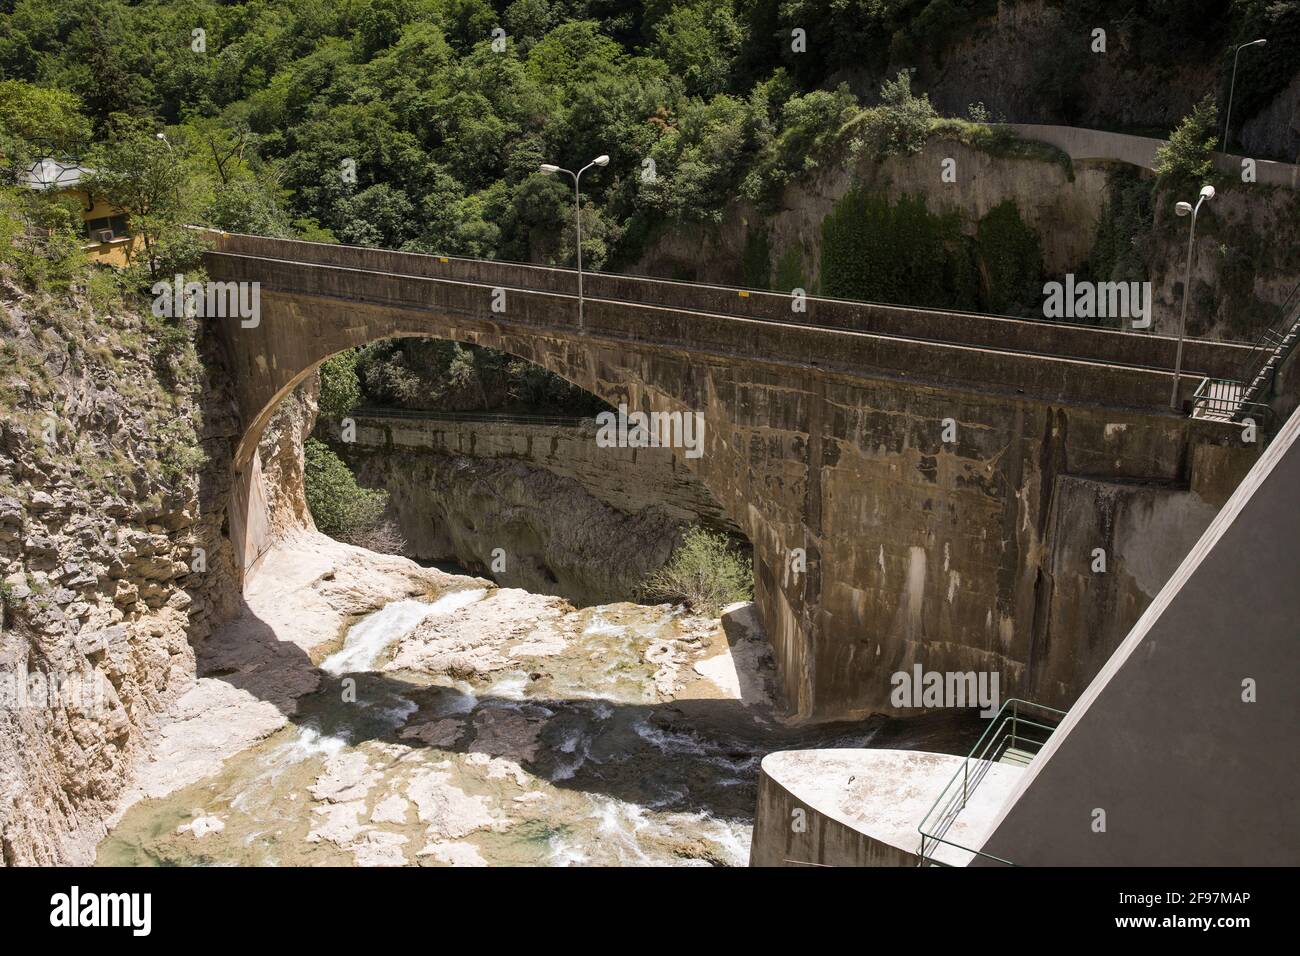 River view with a dam blocking the flow of water Stock Photo